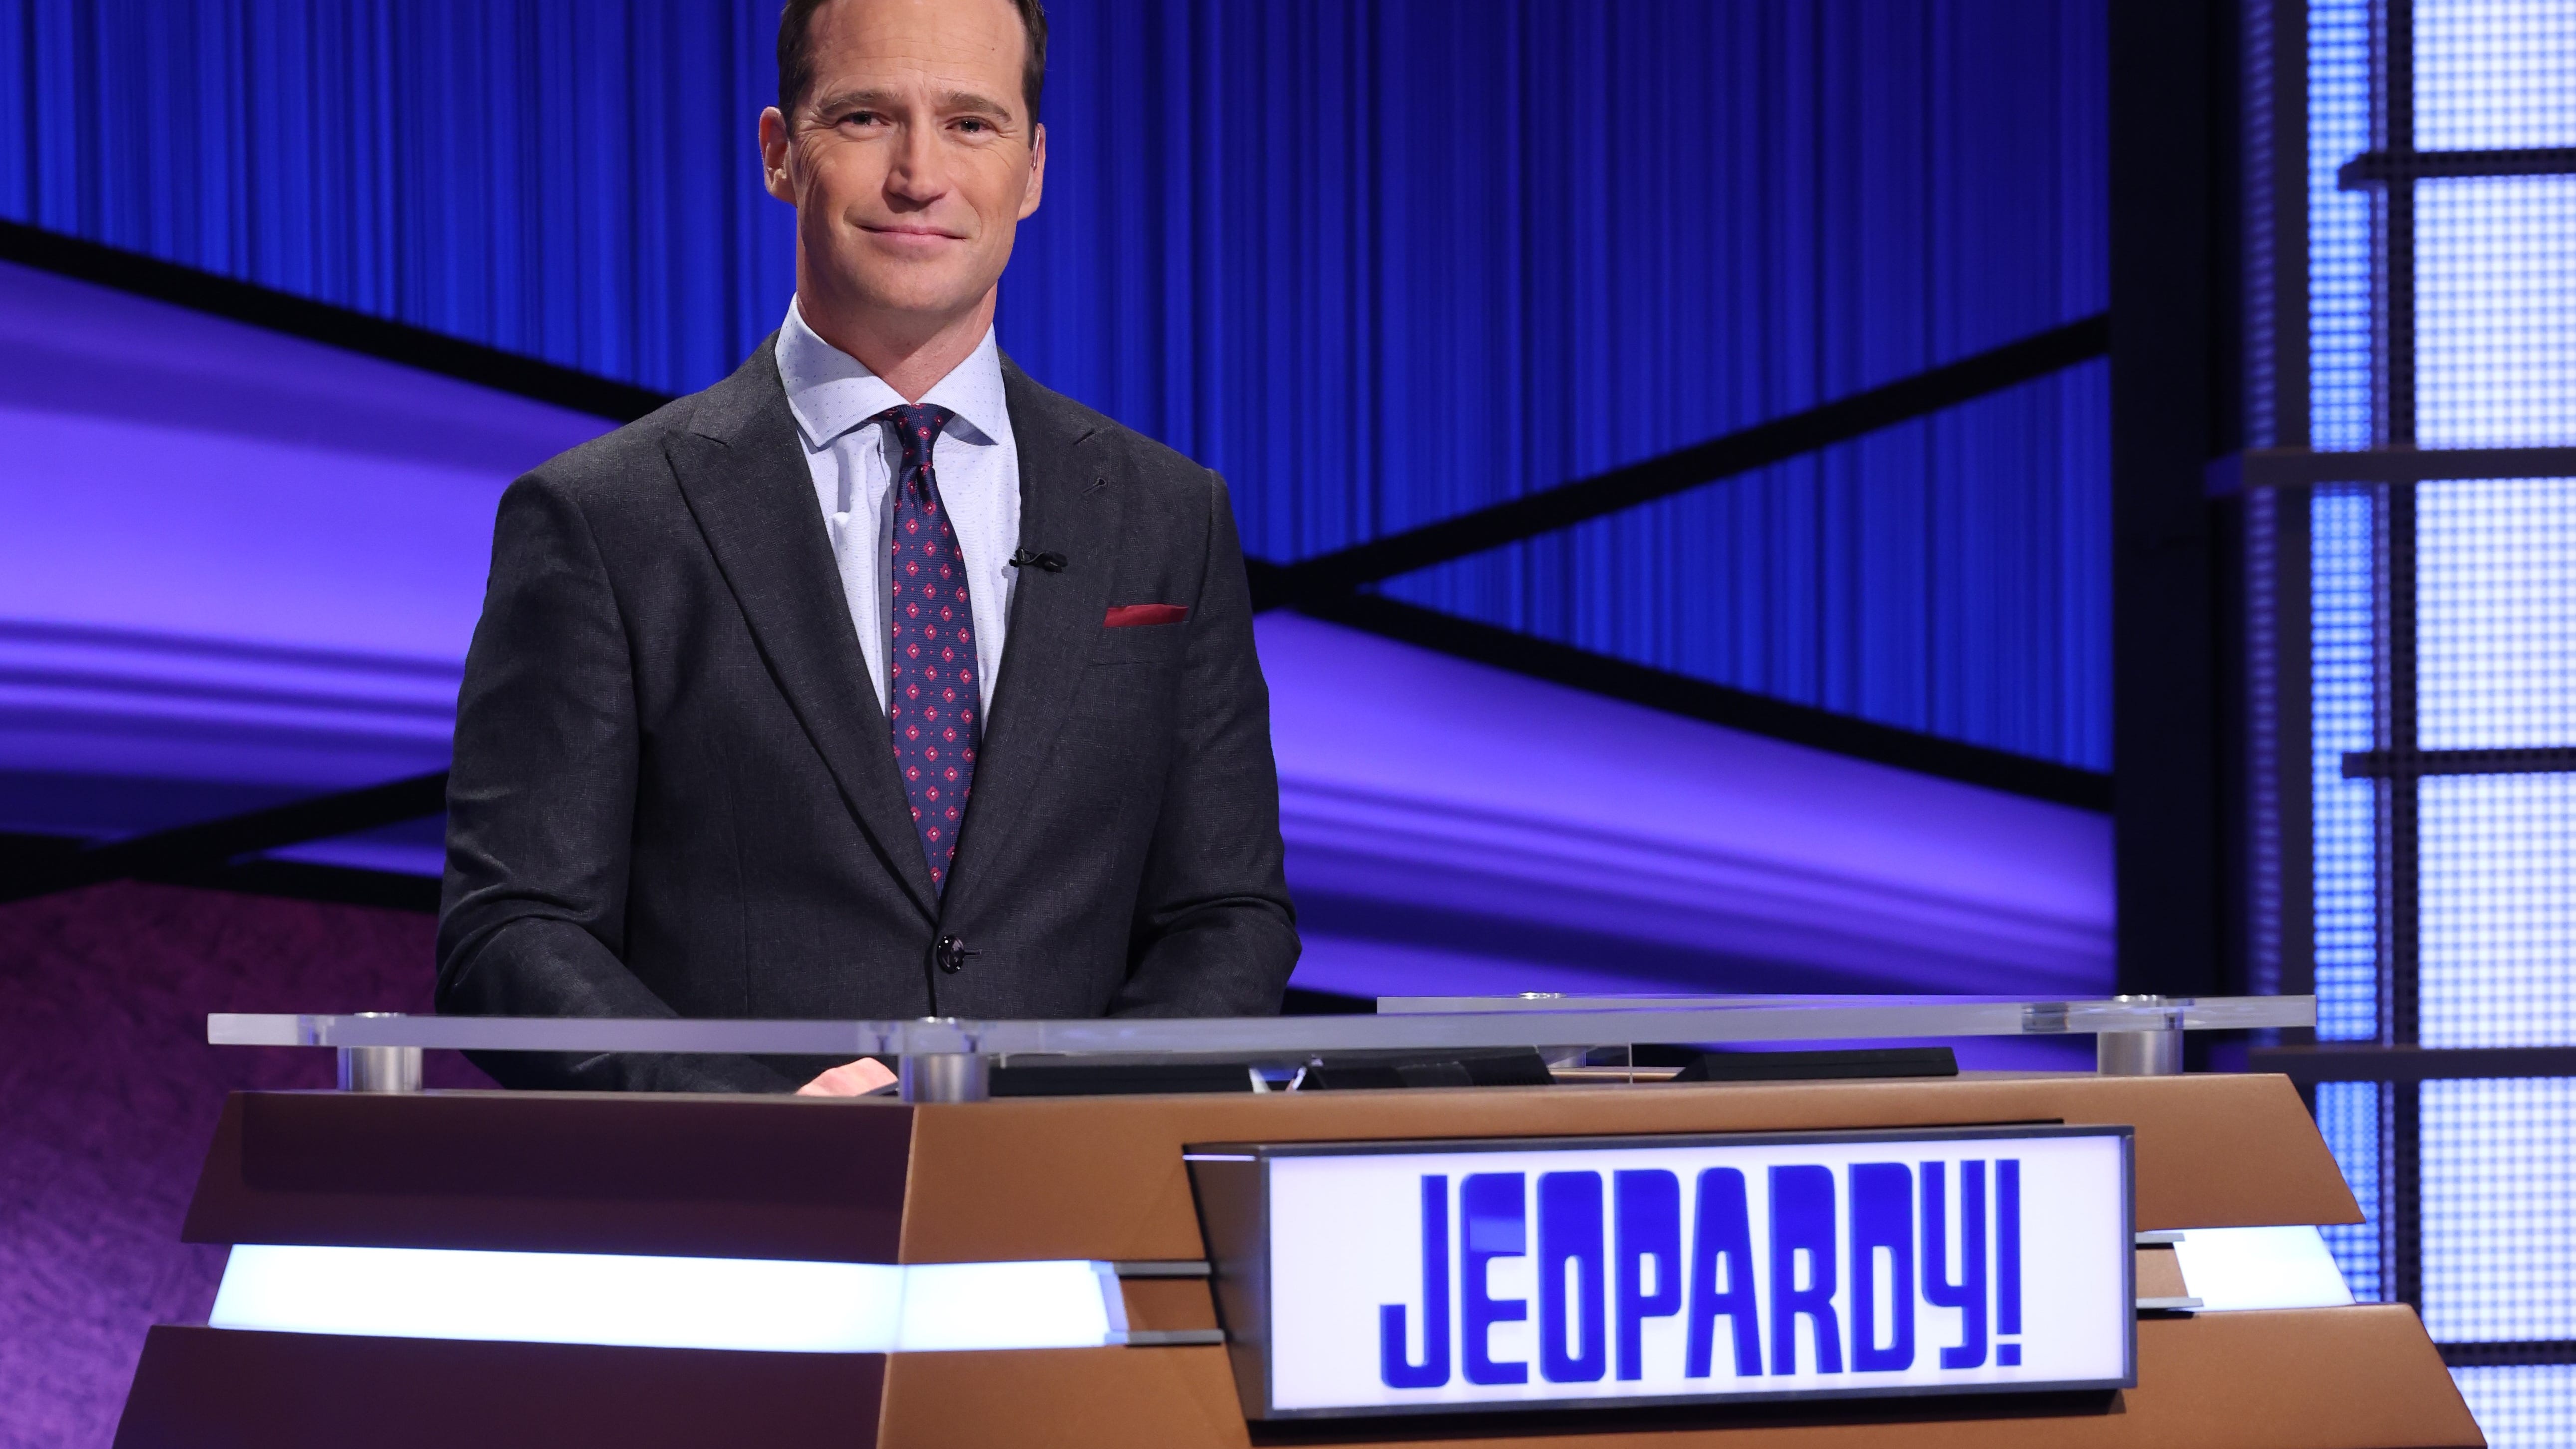 'Jeopardy!' executive producer (and former game-show host) Mike Richards stepped behind the podium for two weeks starting Feb. 22.